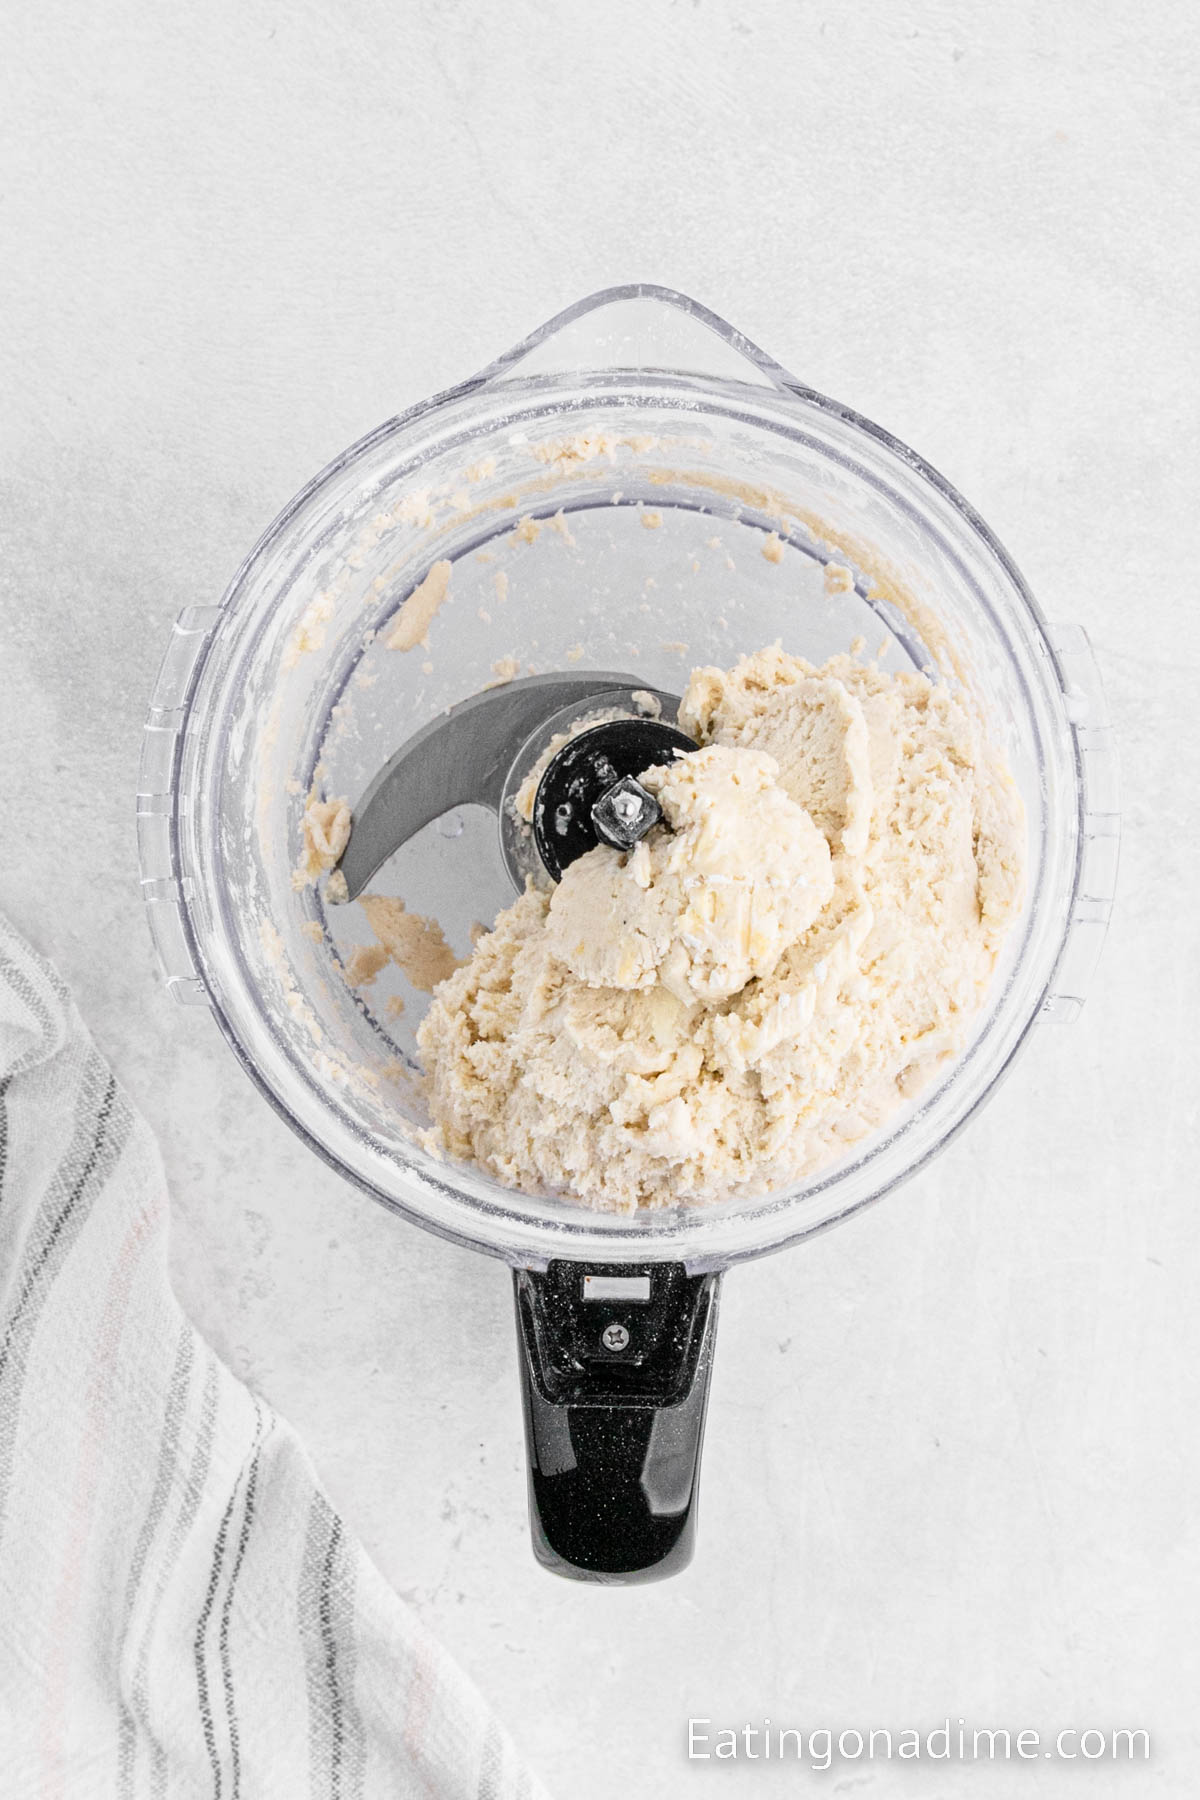 Combining the biscuit dough in a food processor